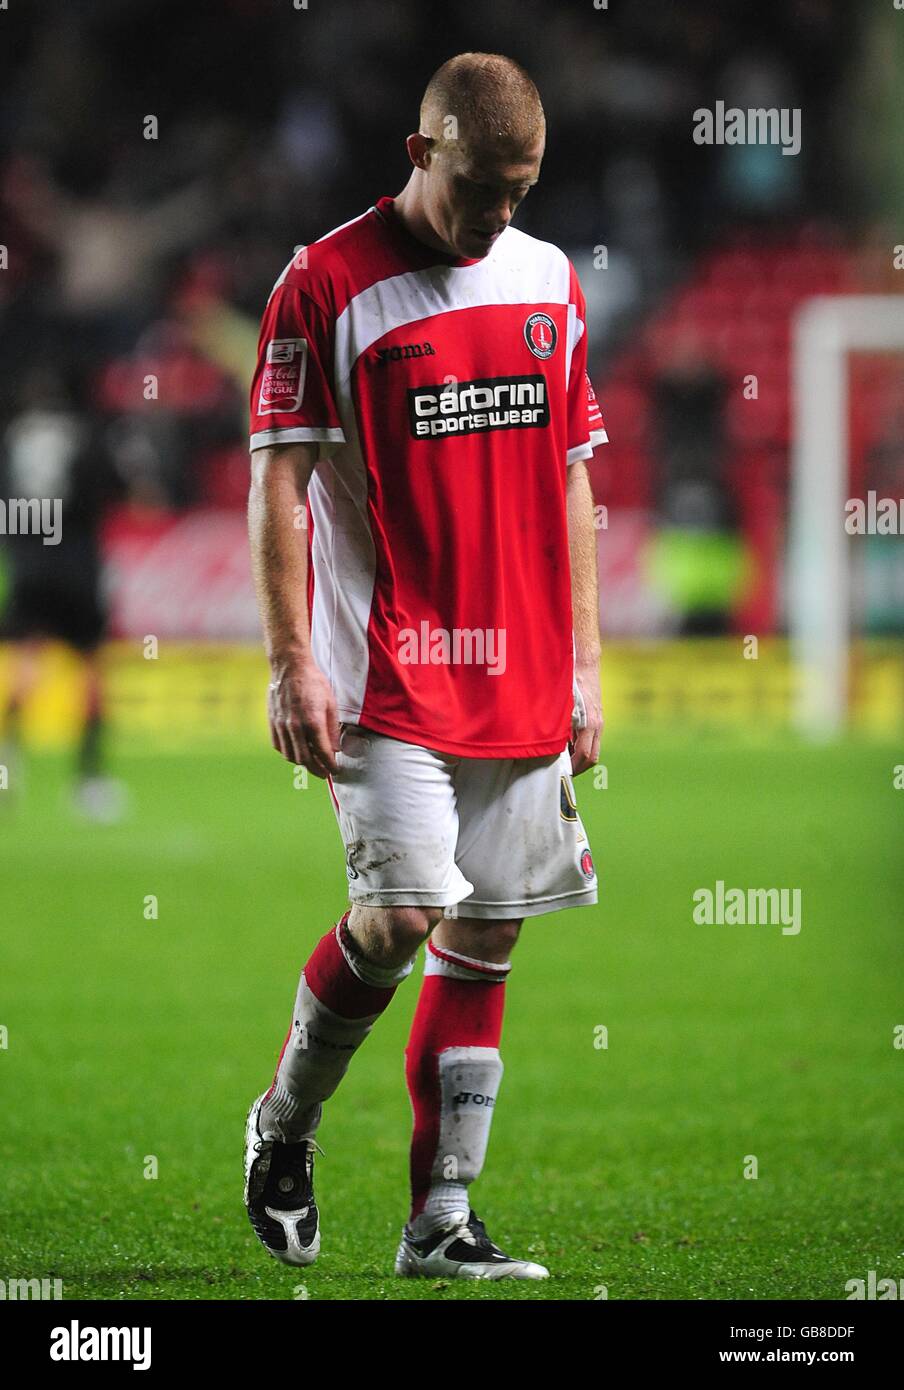 Soccer - Coca-Cola Football Championship - Charlton Athletic v Barnsley - The Valley. Charlton Athletic's Nick bailey walks off the pitch dejected as his side lose to barnsley Stock Photo